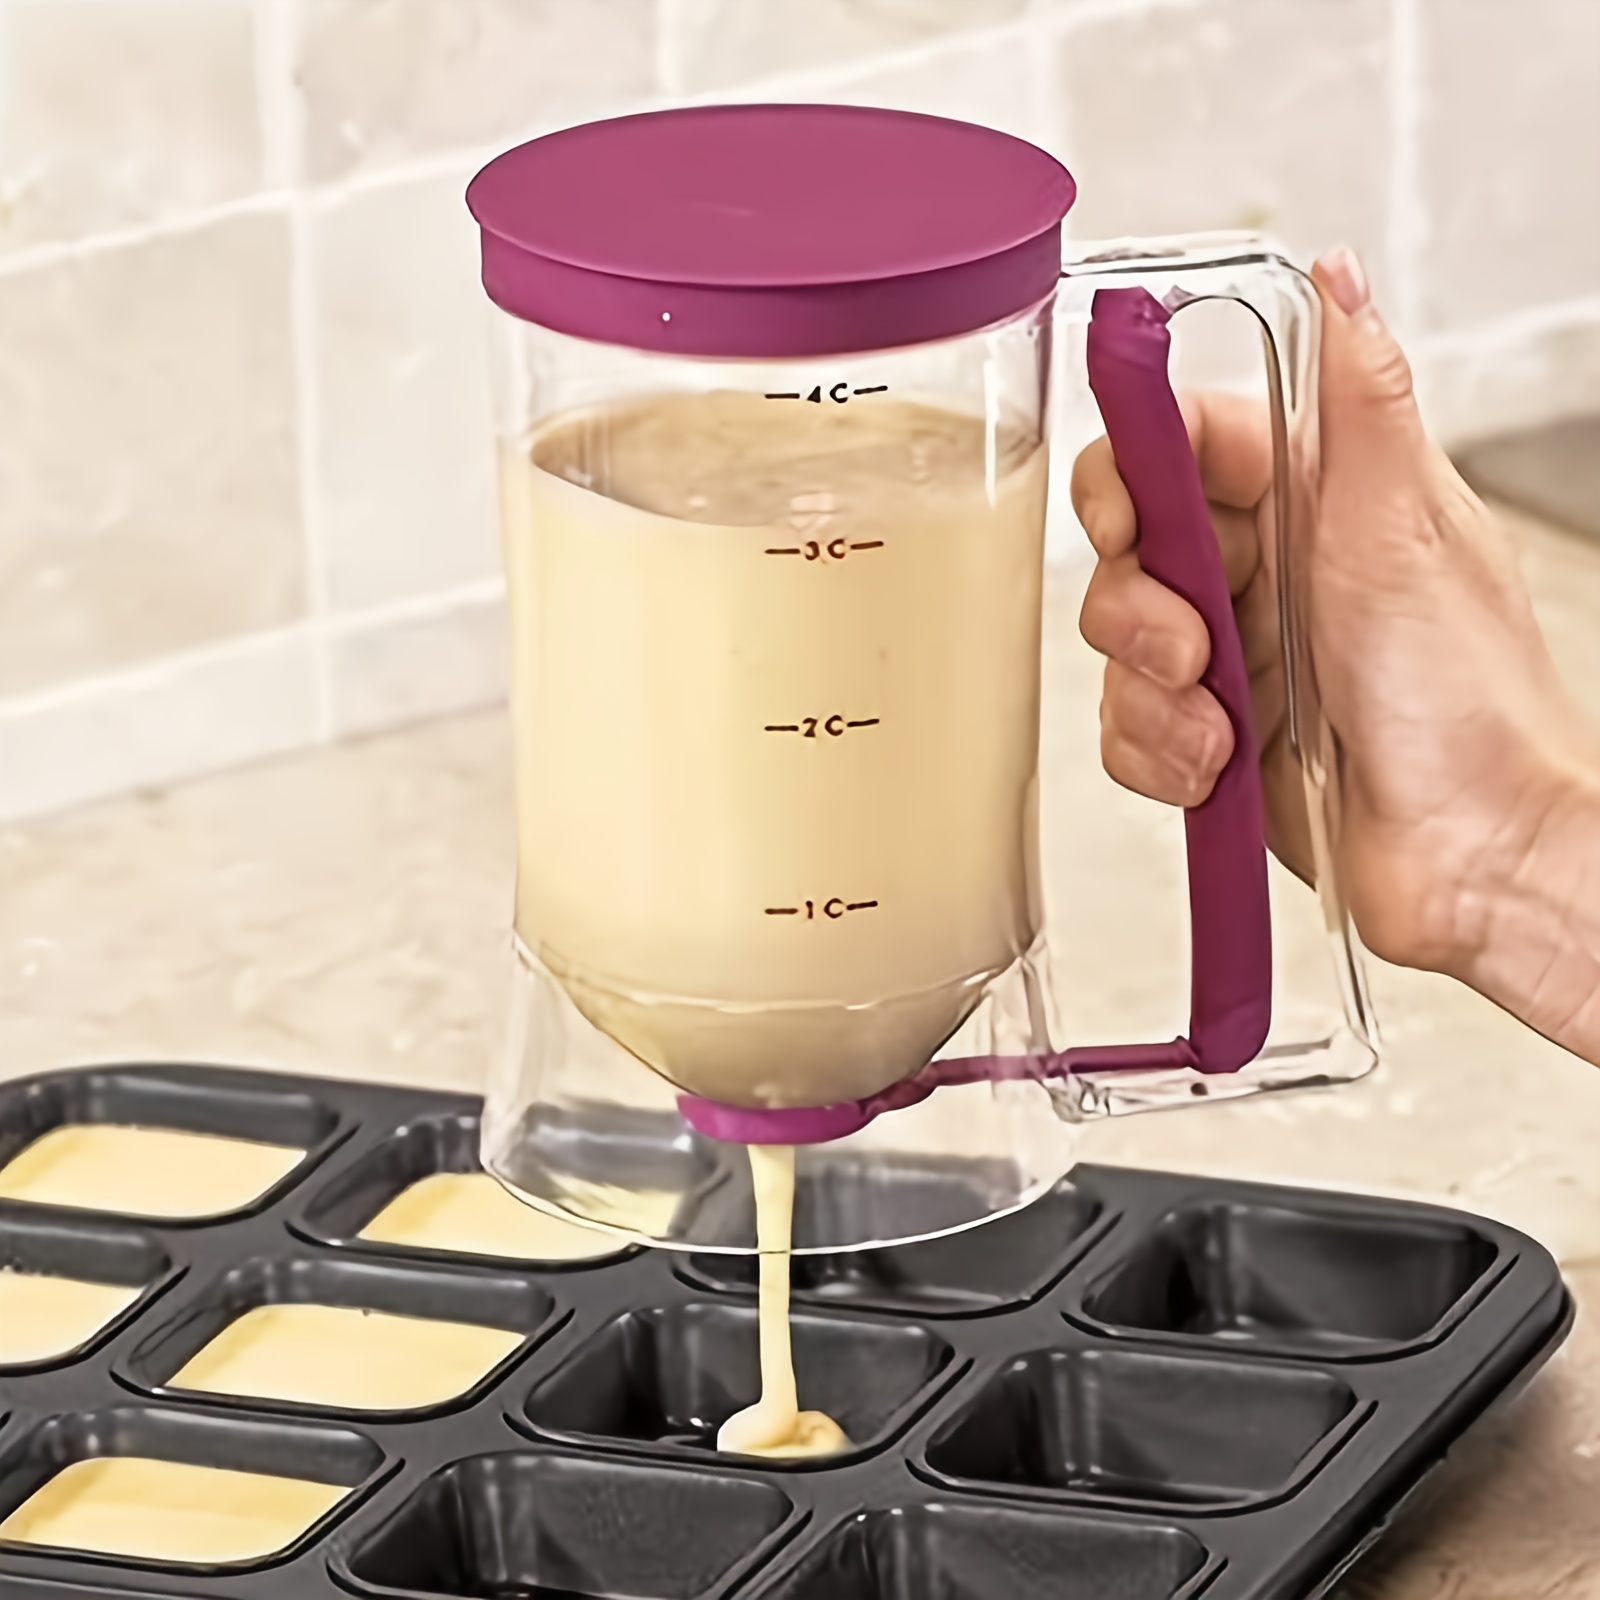 Pancake Batter Dispenser Tool Cupcake Cake Dispenser Perfect for Baking  Cupcakes Waffles Cakes and Muffins with Measuring Label Easy to Clean